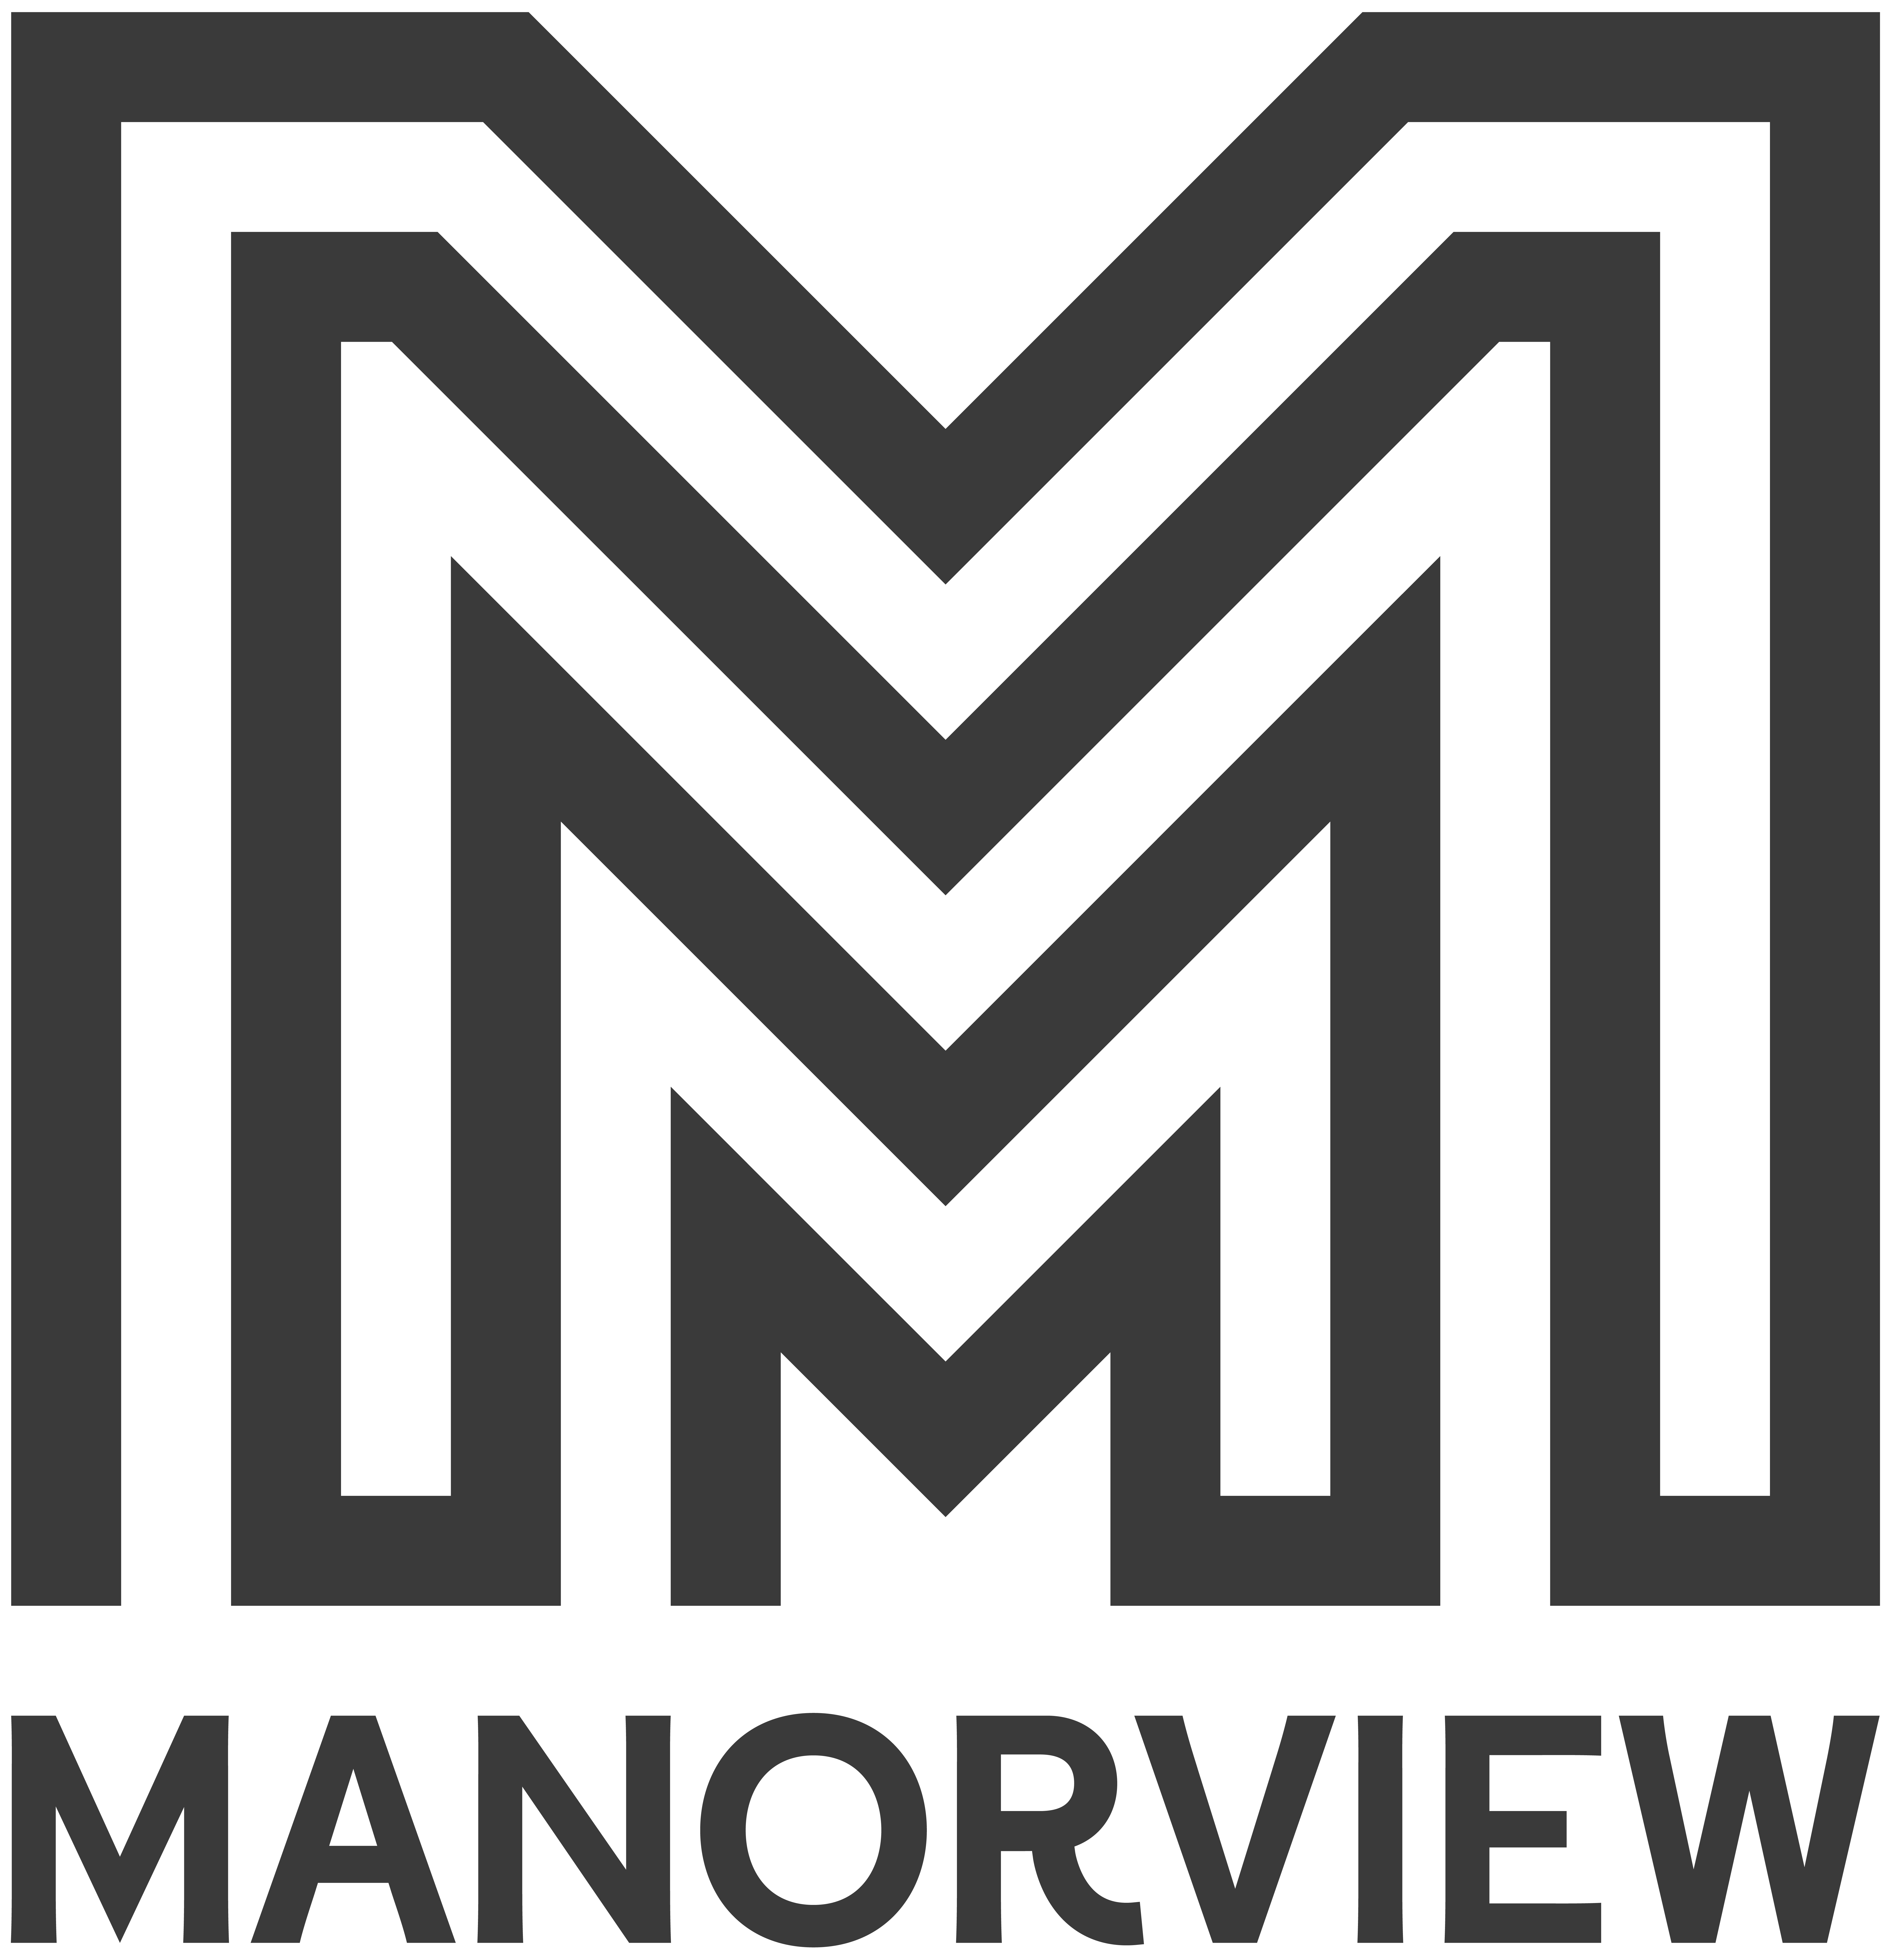 Part of the Manorview Collection